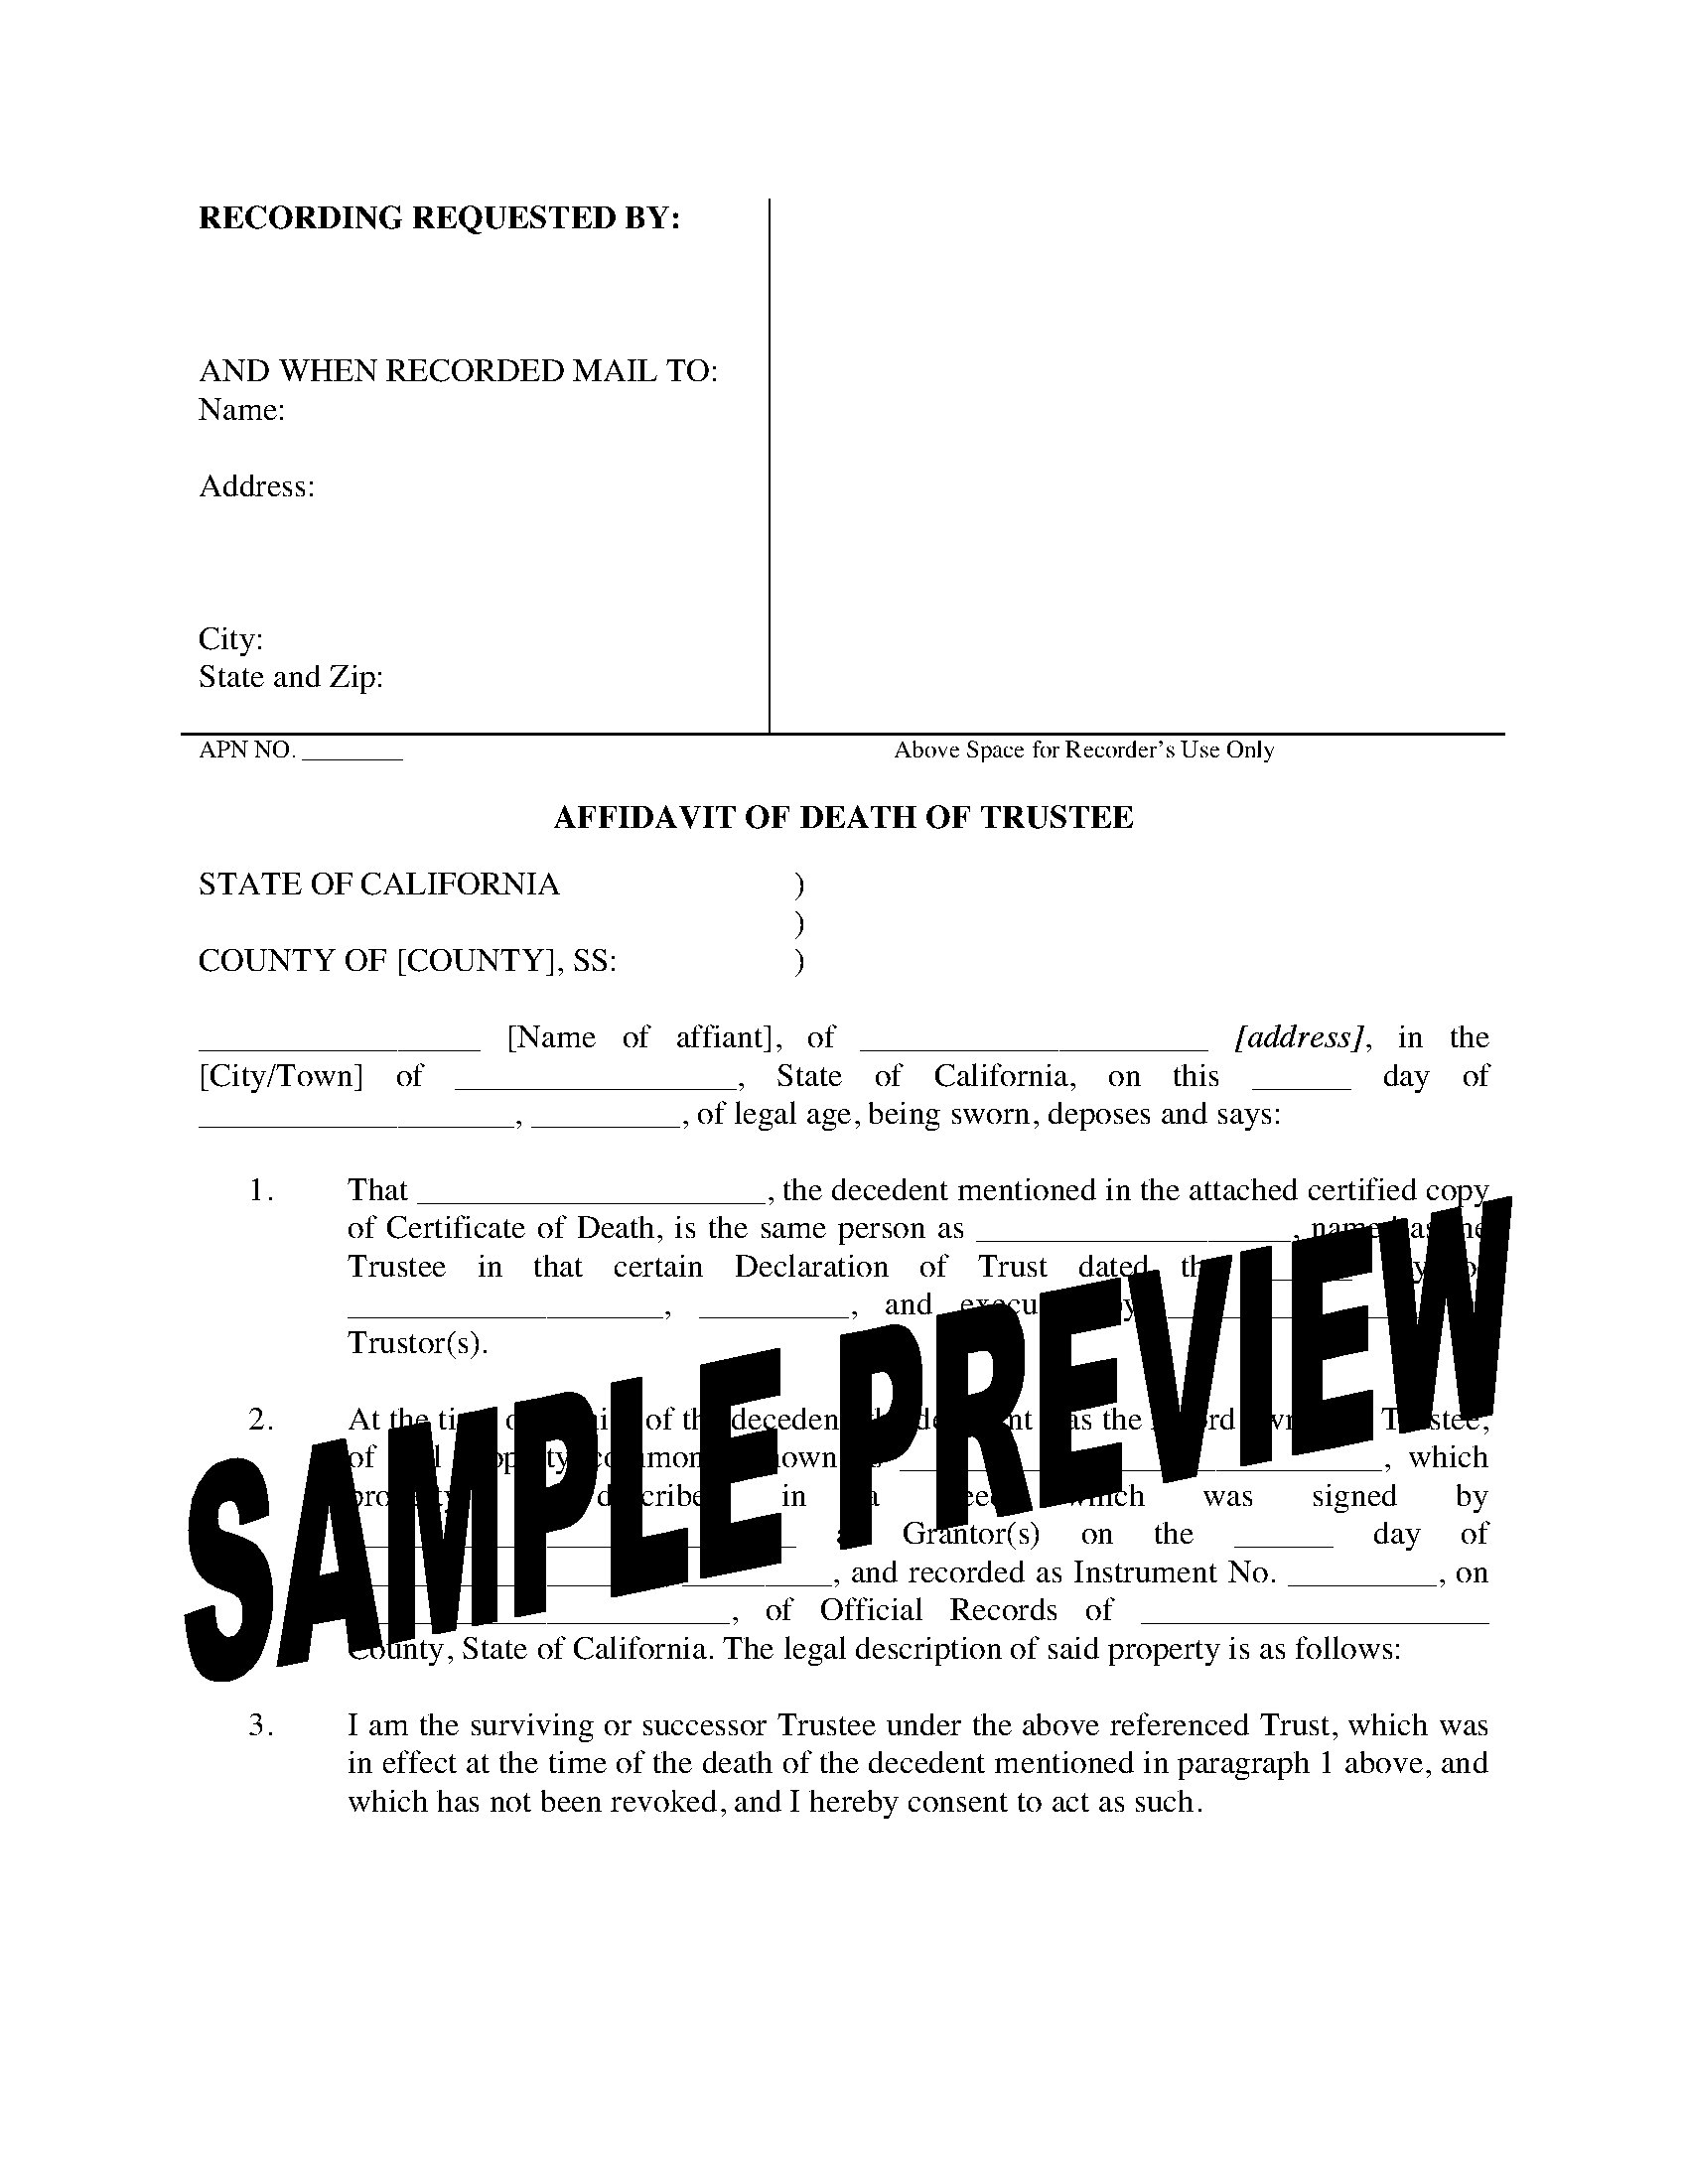 California Affidavit Of Death Of Trustee Legal Forms And Business Templates Megadox Com